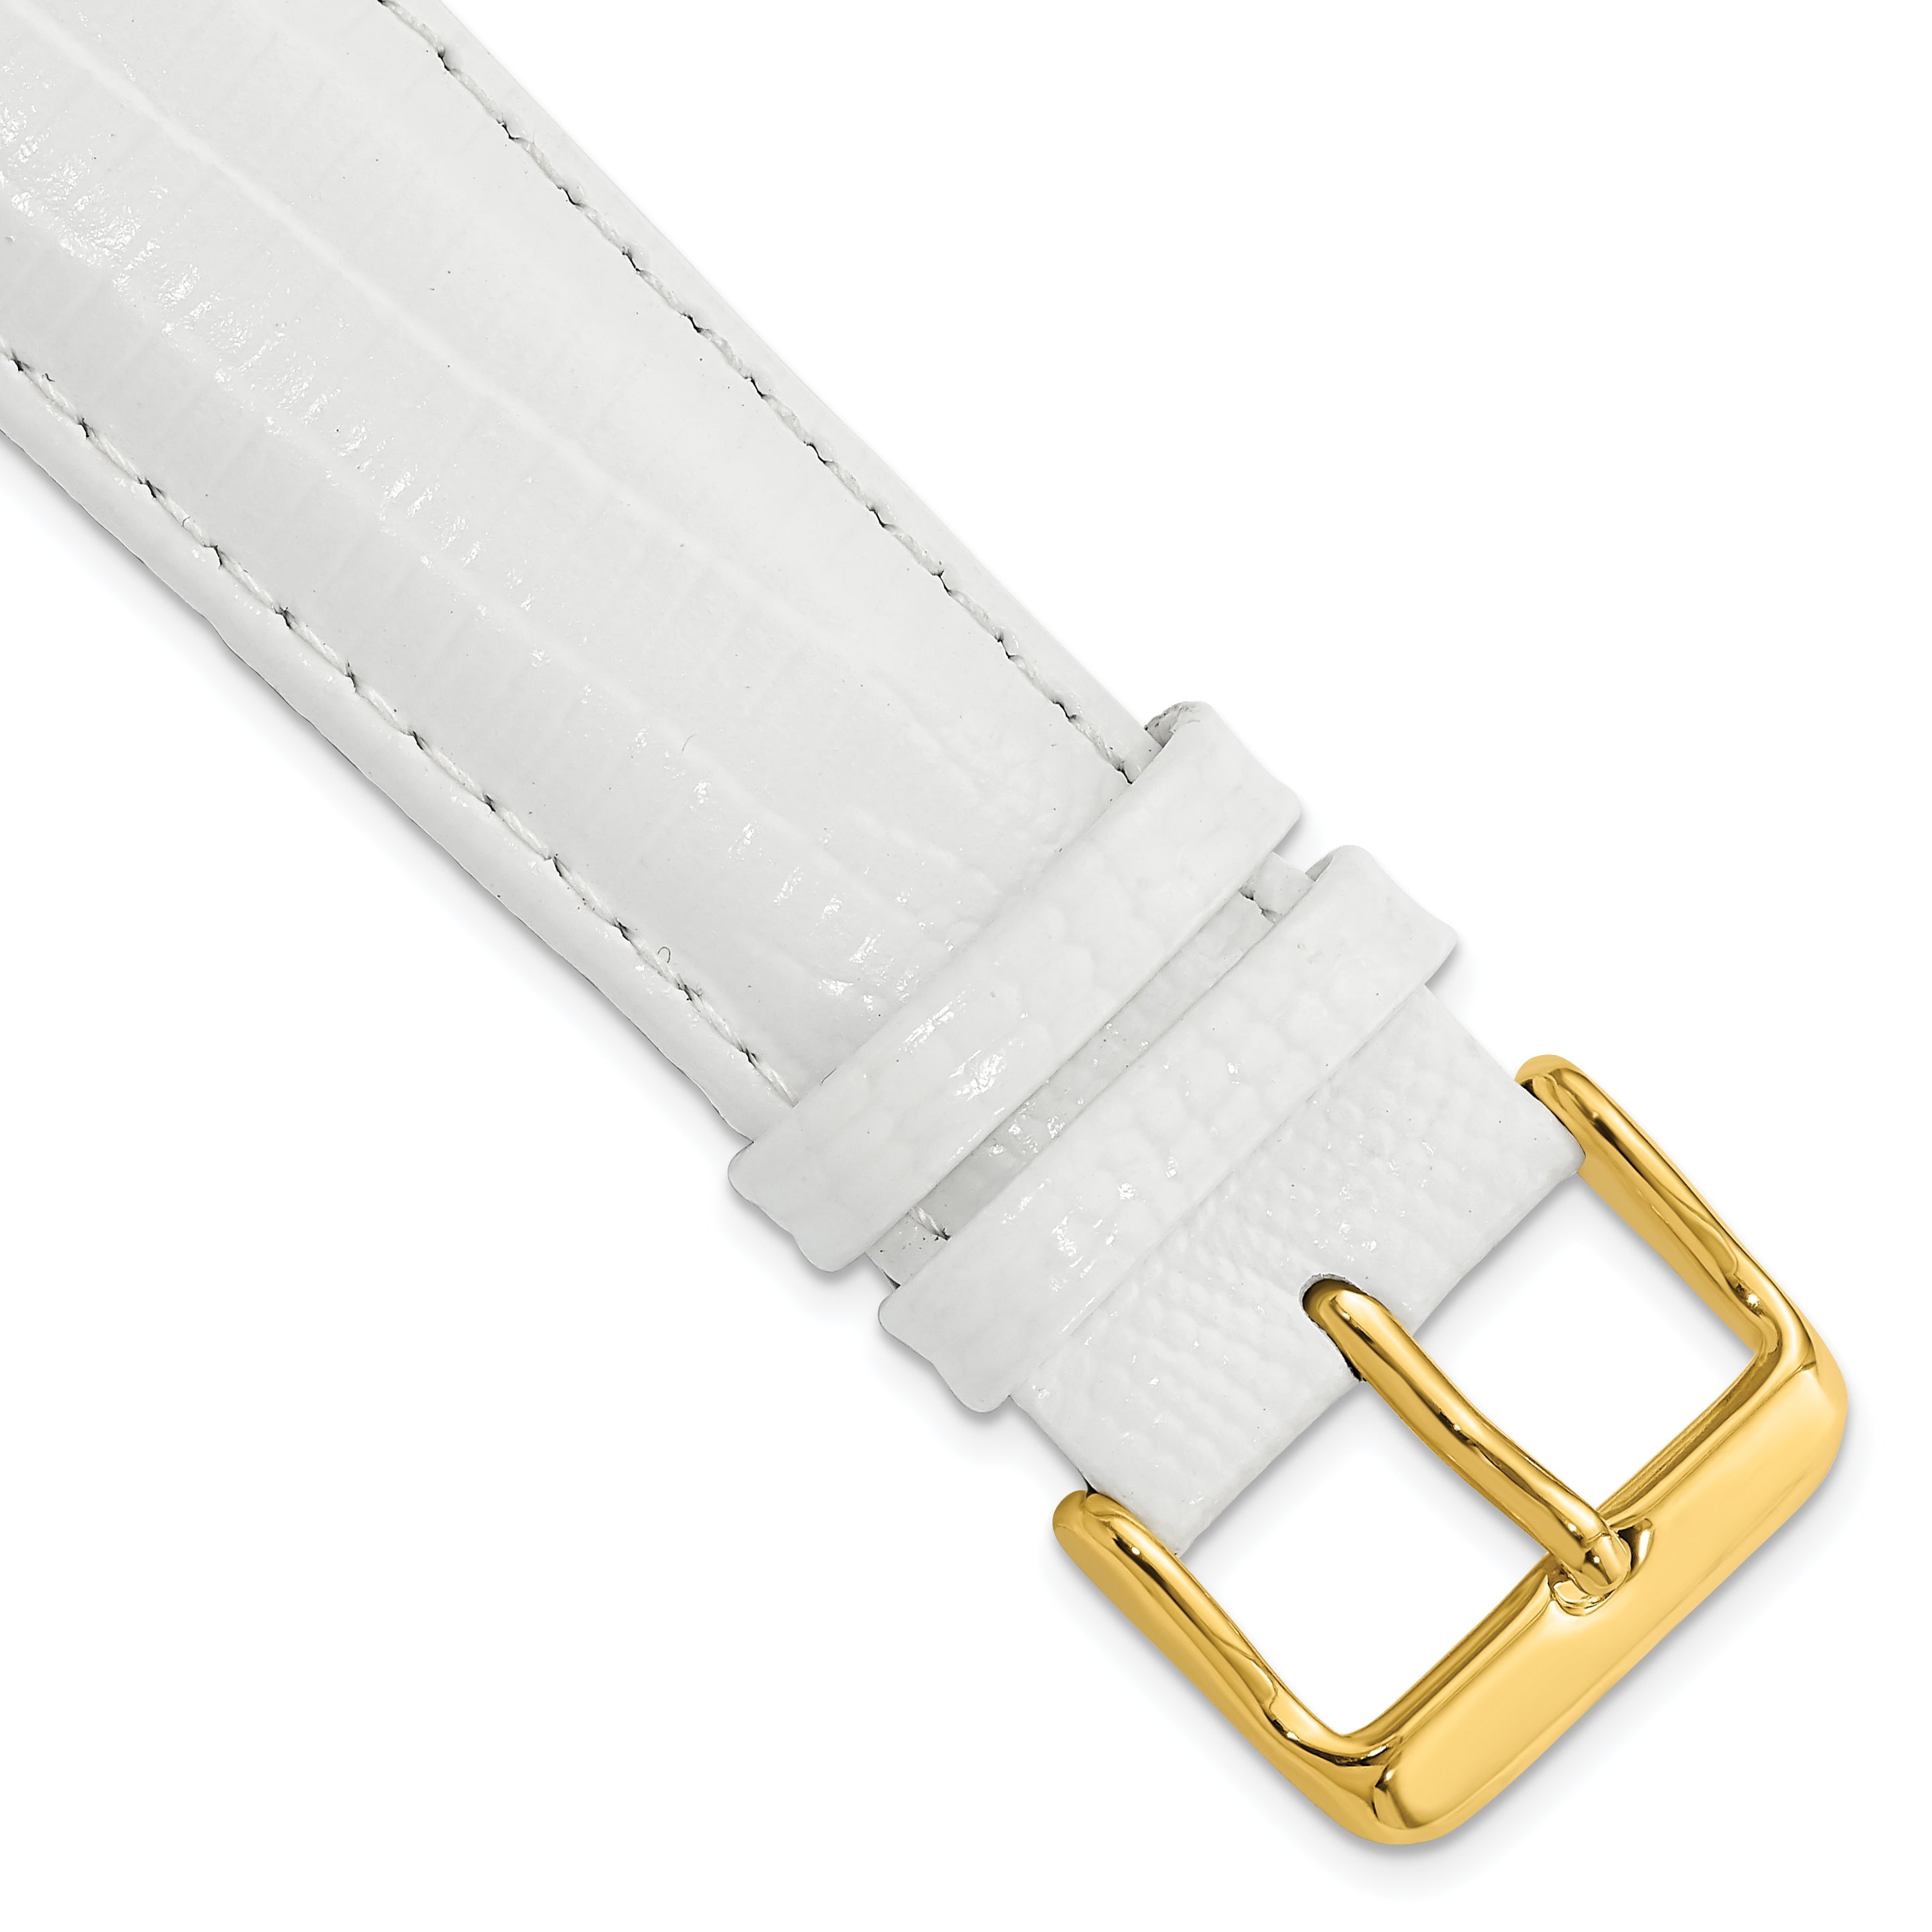 DeBeer 22mm White Teju Liz Grain Leather with Gold-tone Buckle 7.5 inch Watch Band